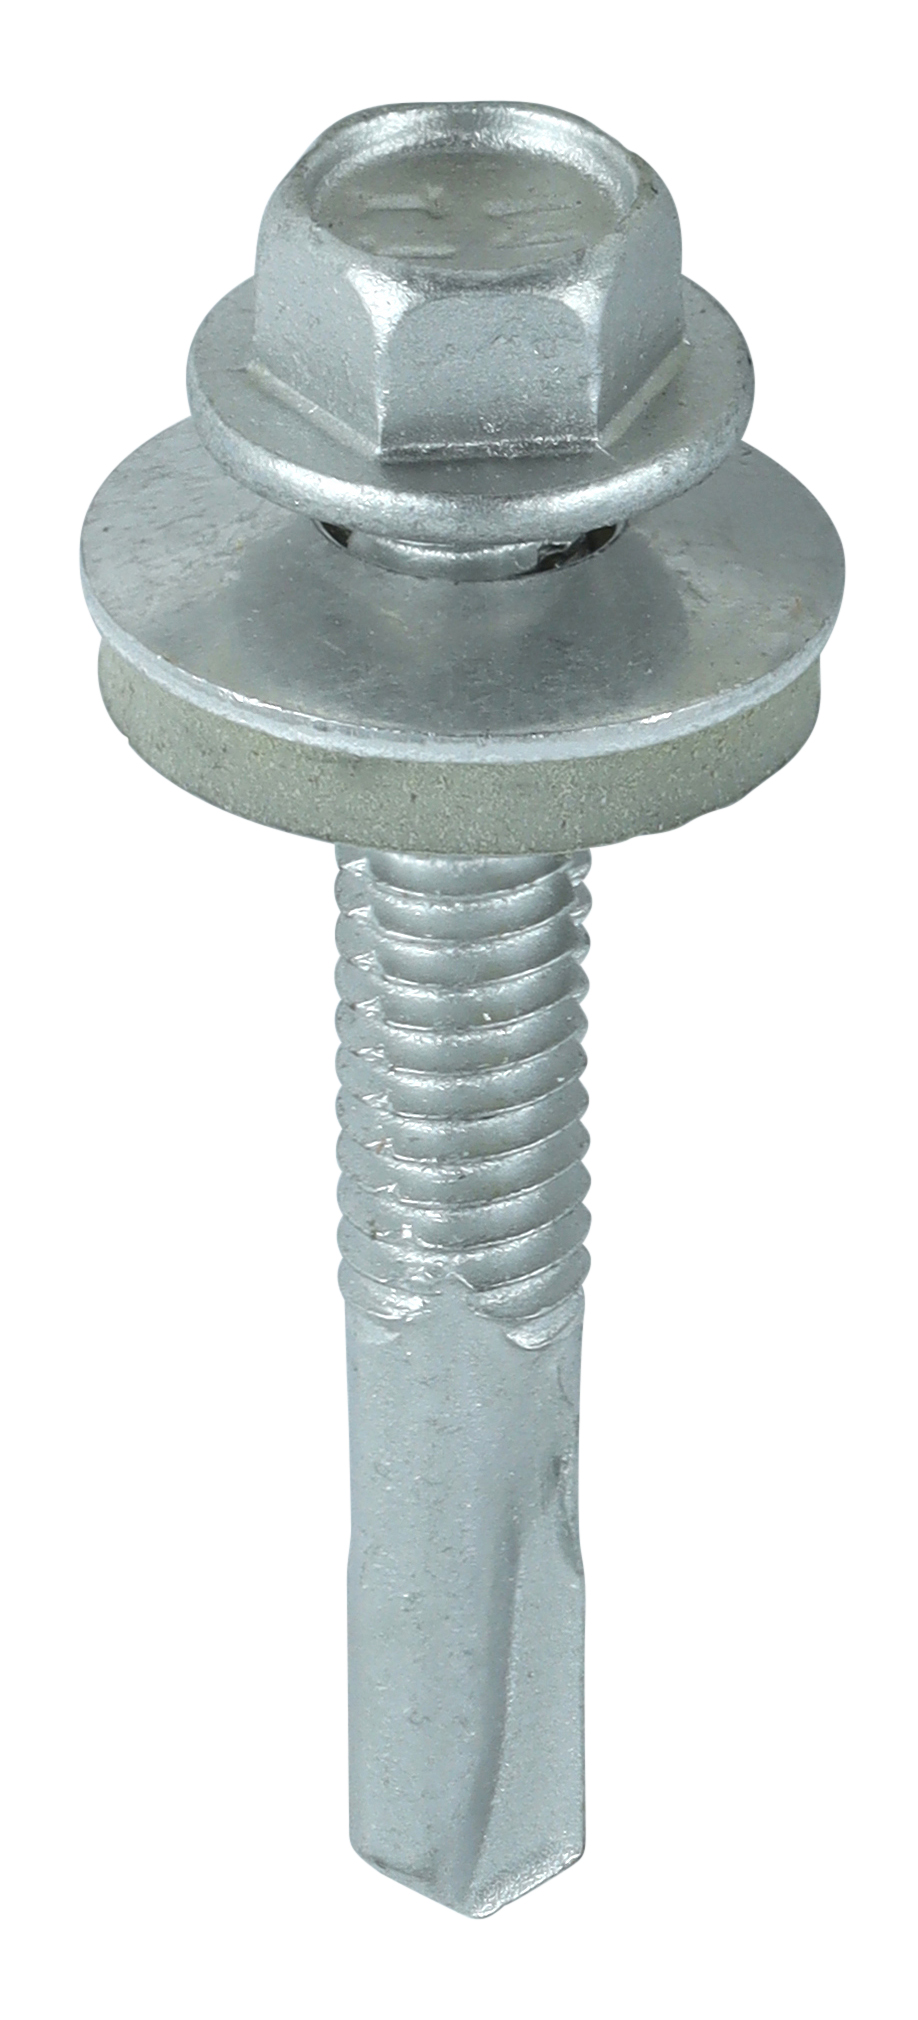 Self-Drilling Screws with EPDM Washer - 5.5 x 38mm